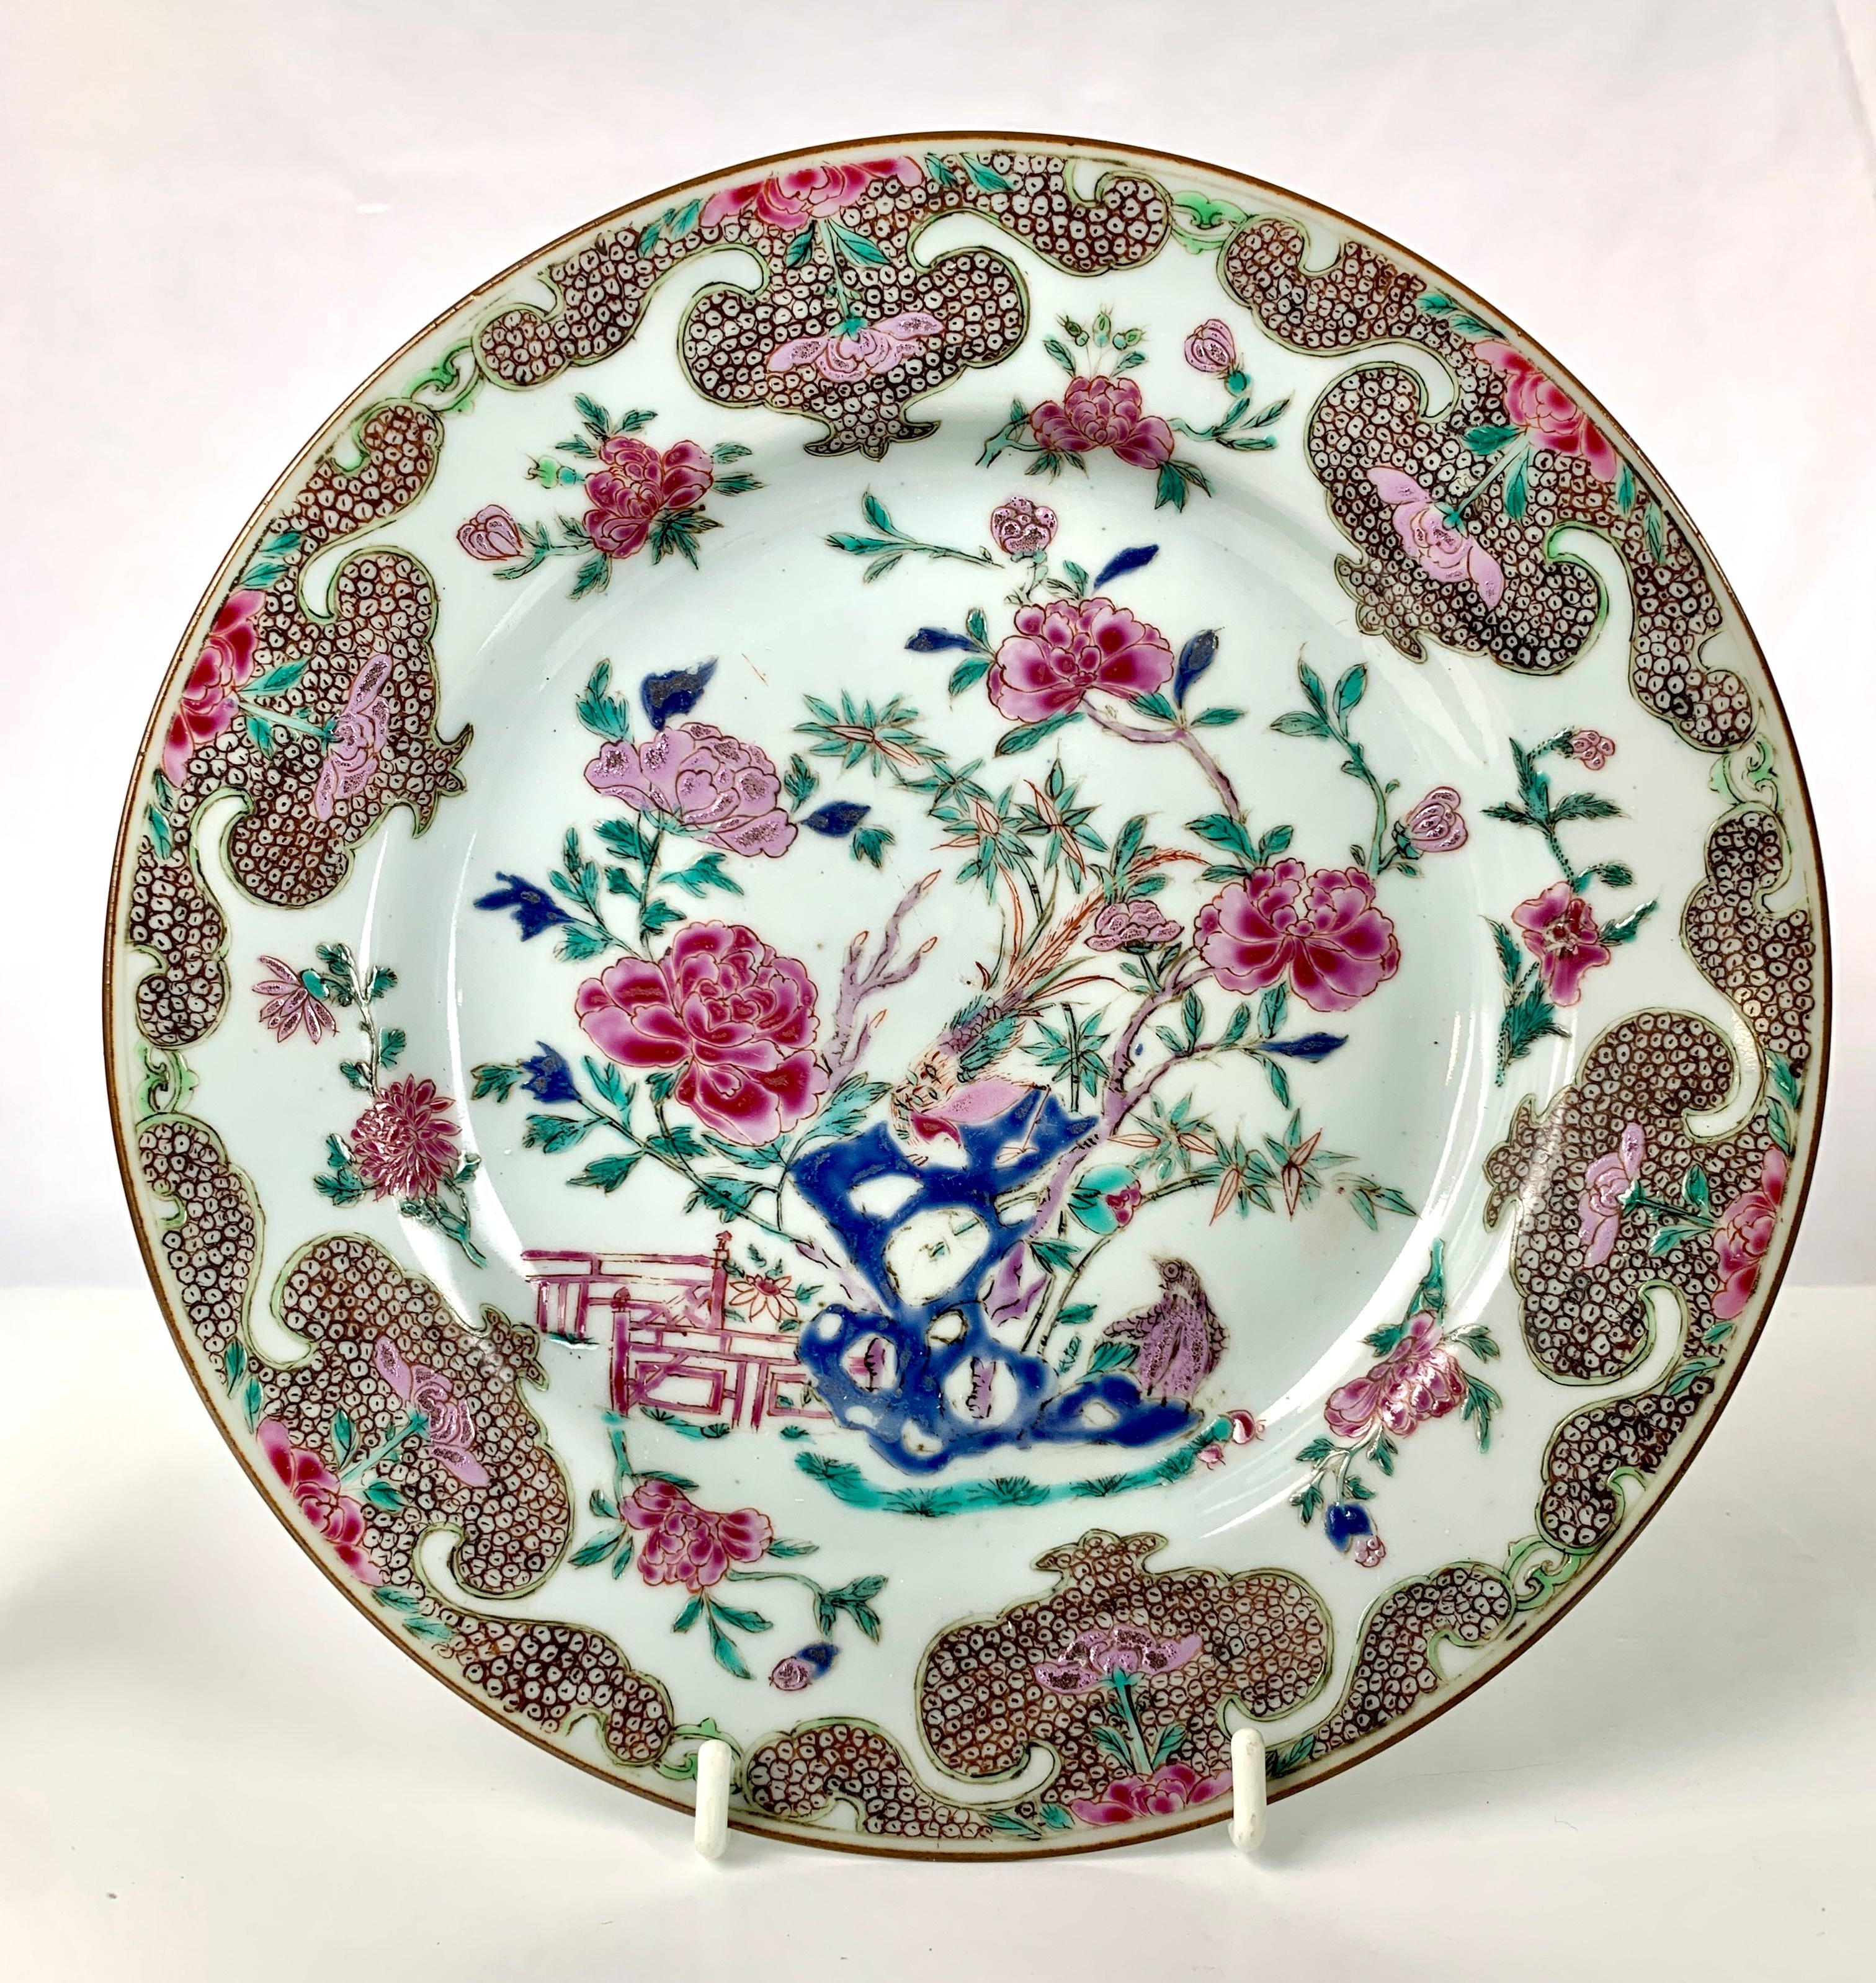 The combination of colors is marvelous!
In the center of each plate, we see a hand painted garden with blue rockwork, purple and white peonies, a single pink peony, a pair of long-tailed songbirds, green bamboo, and a red garden fence,
The floral